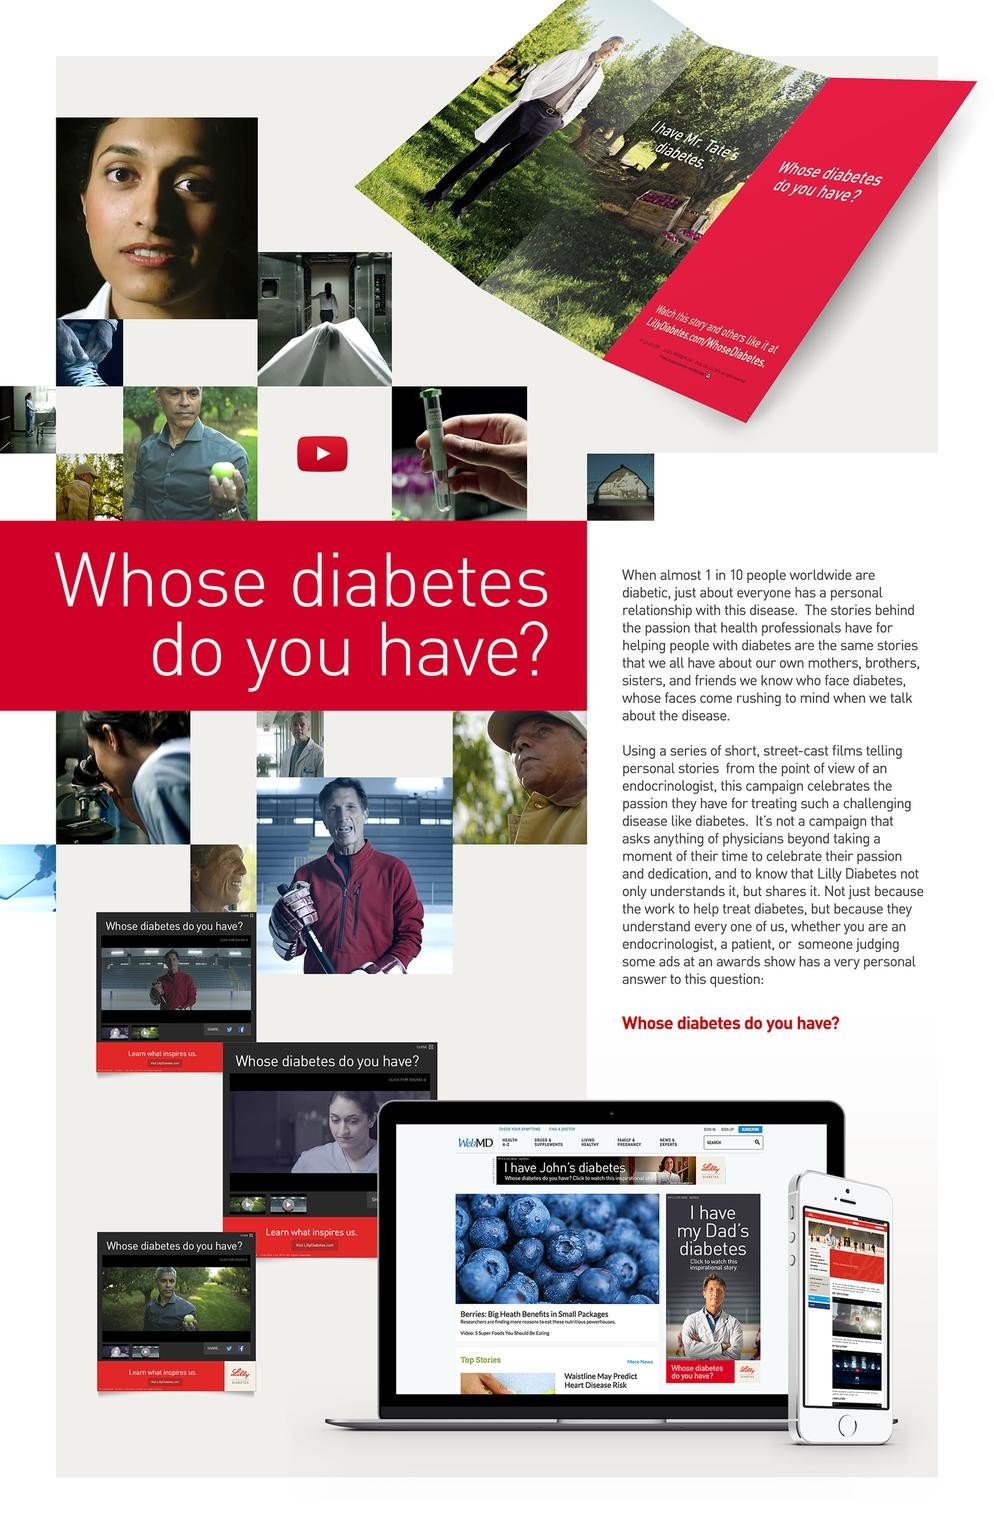 Whose Diabetes Do You Have Campaign: Films, Print, Banners